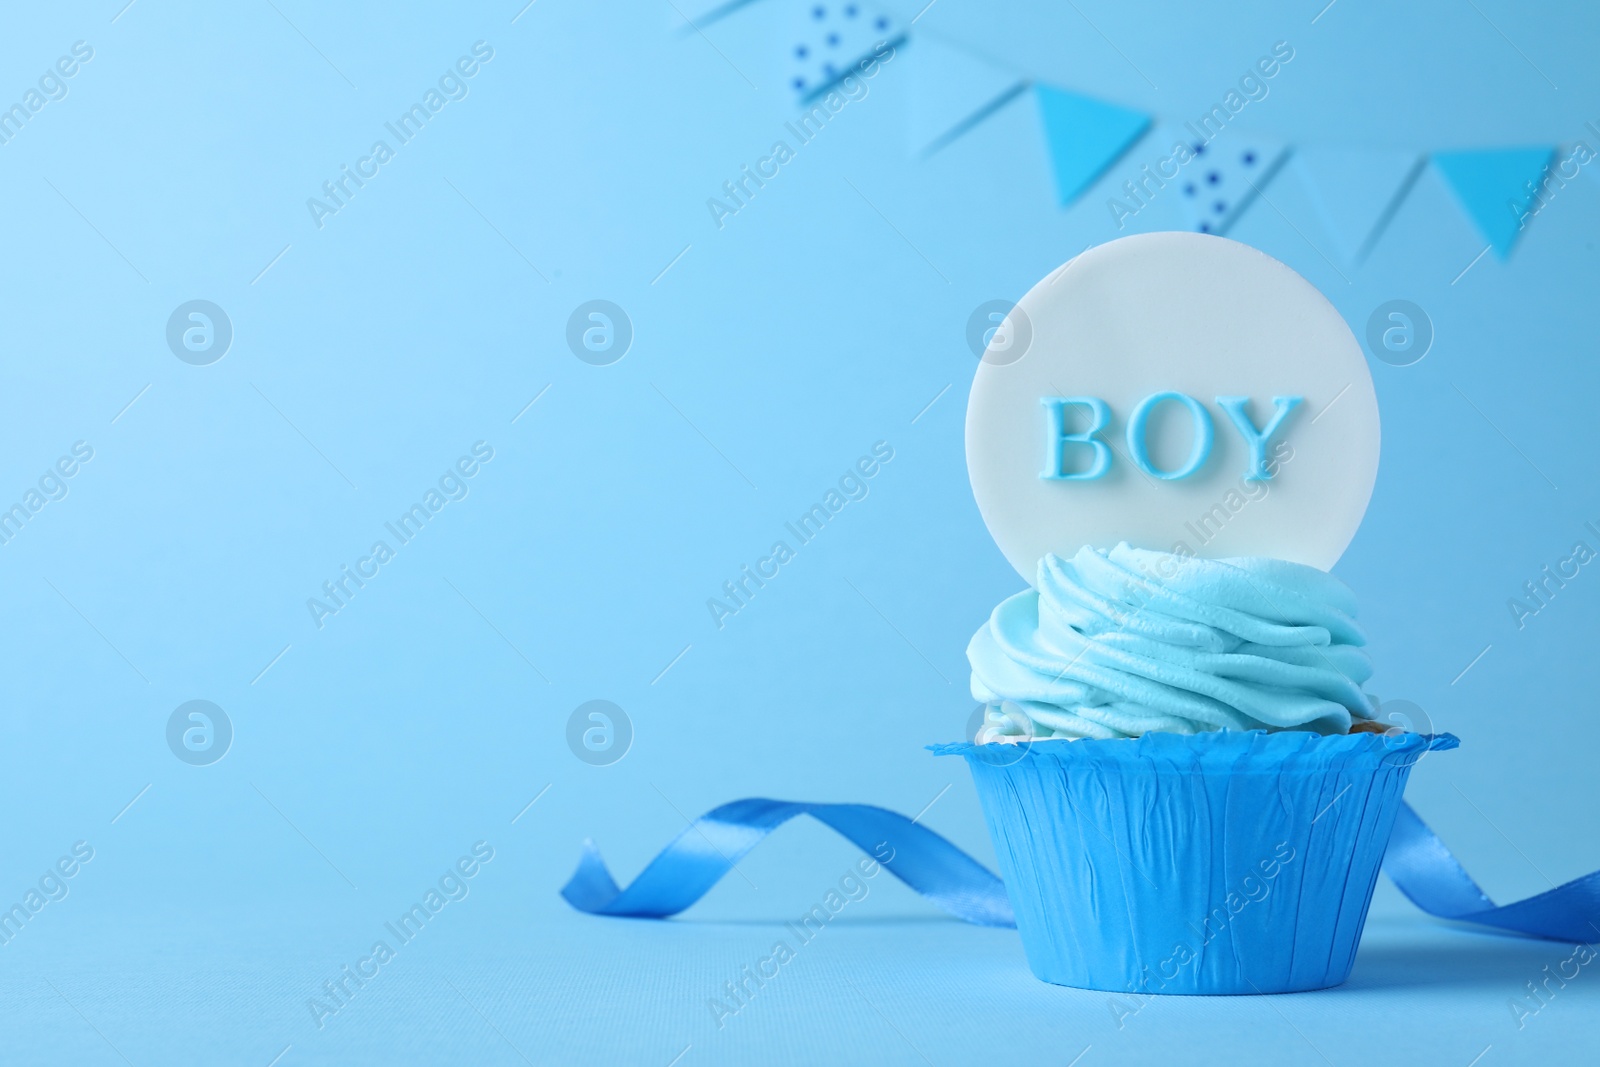 Photo of Beautifully decorated baby shower cupcake with cream and Boy topper on light blue background. Space for text